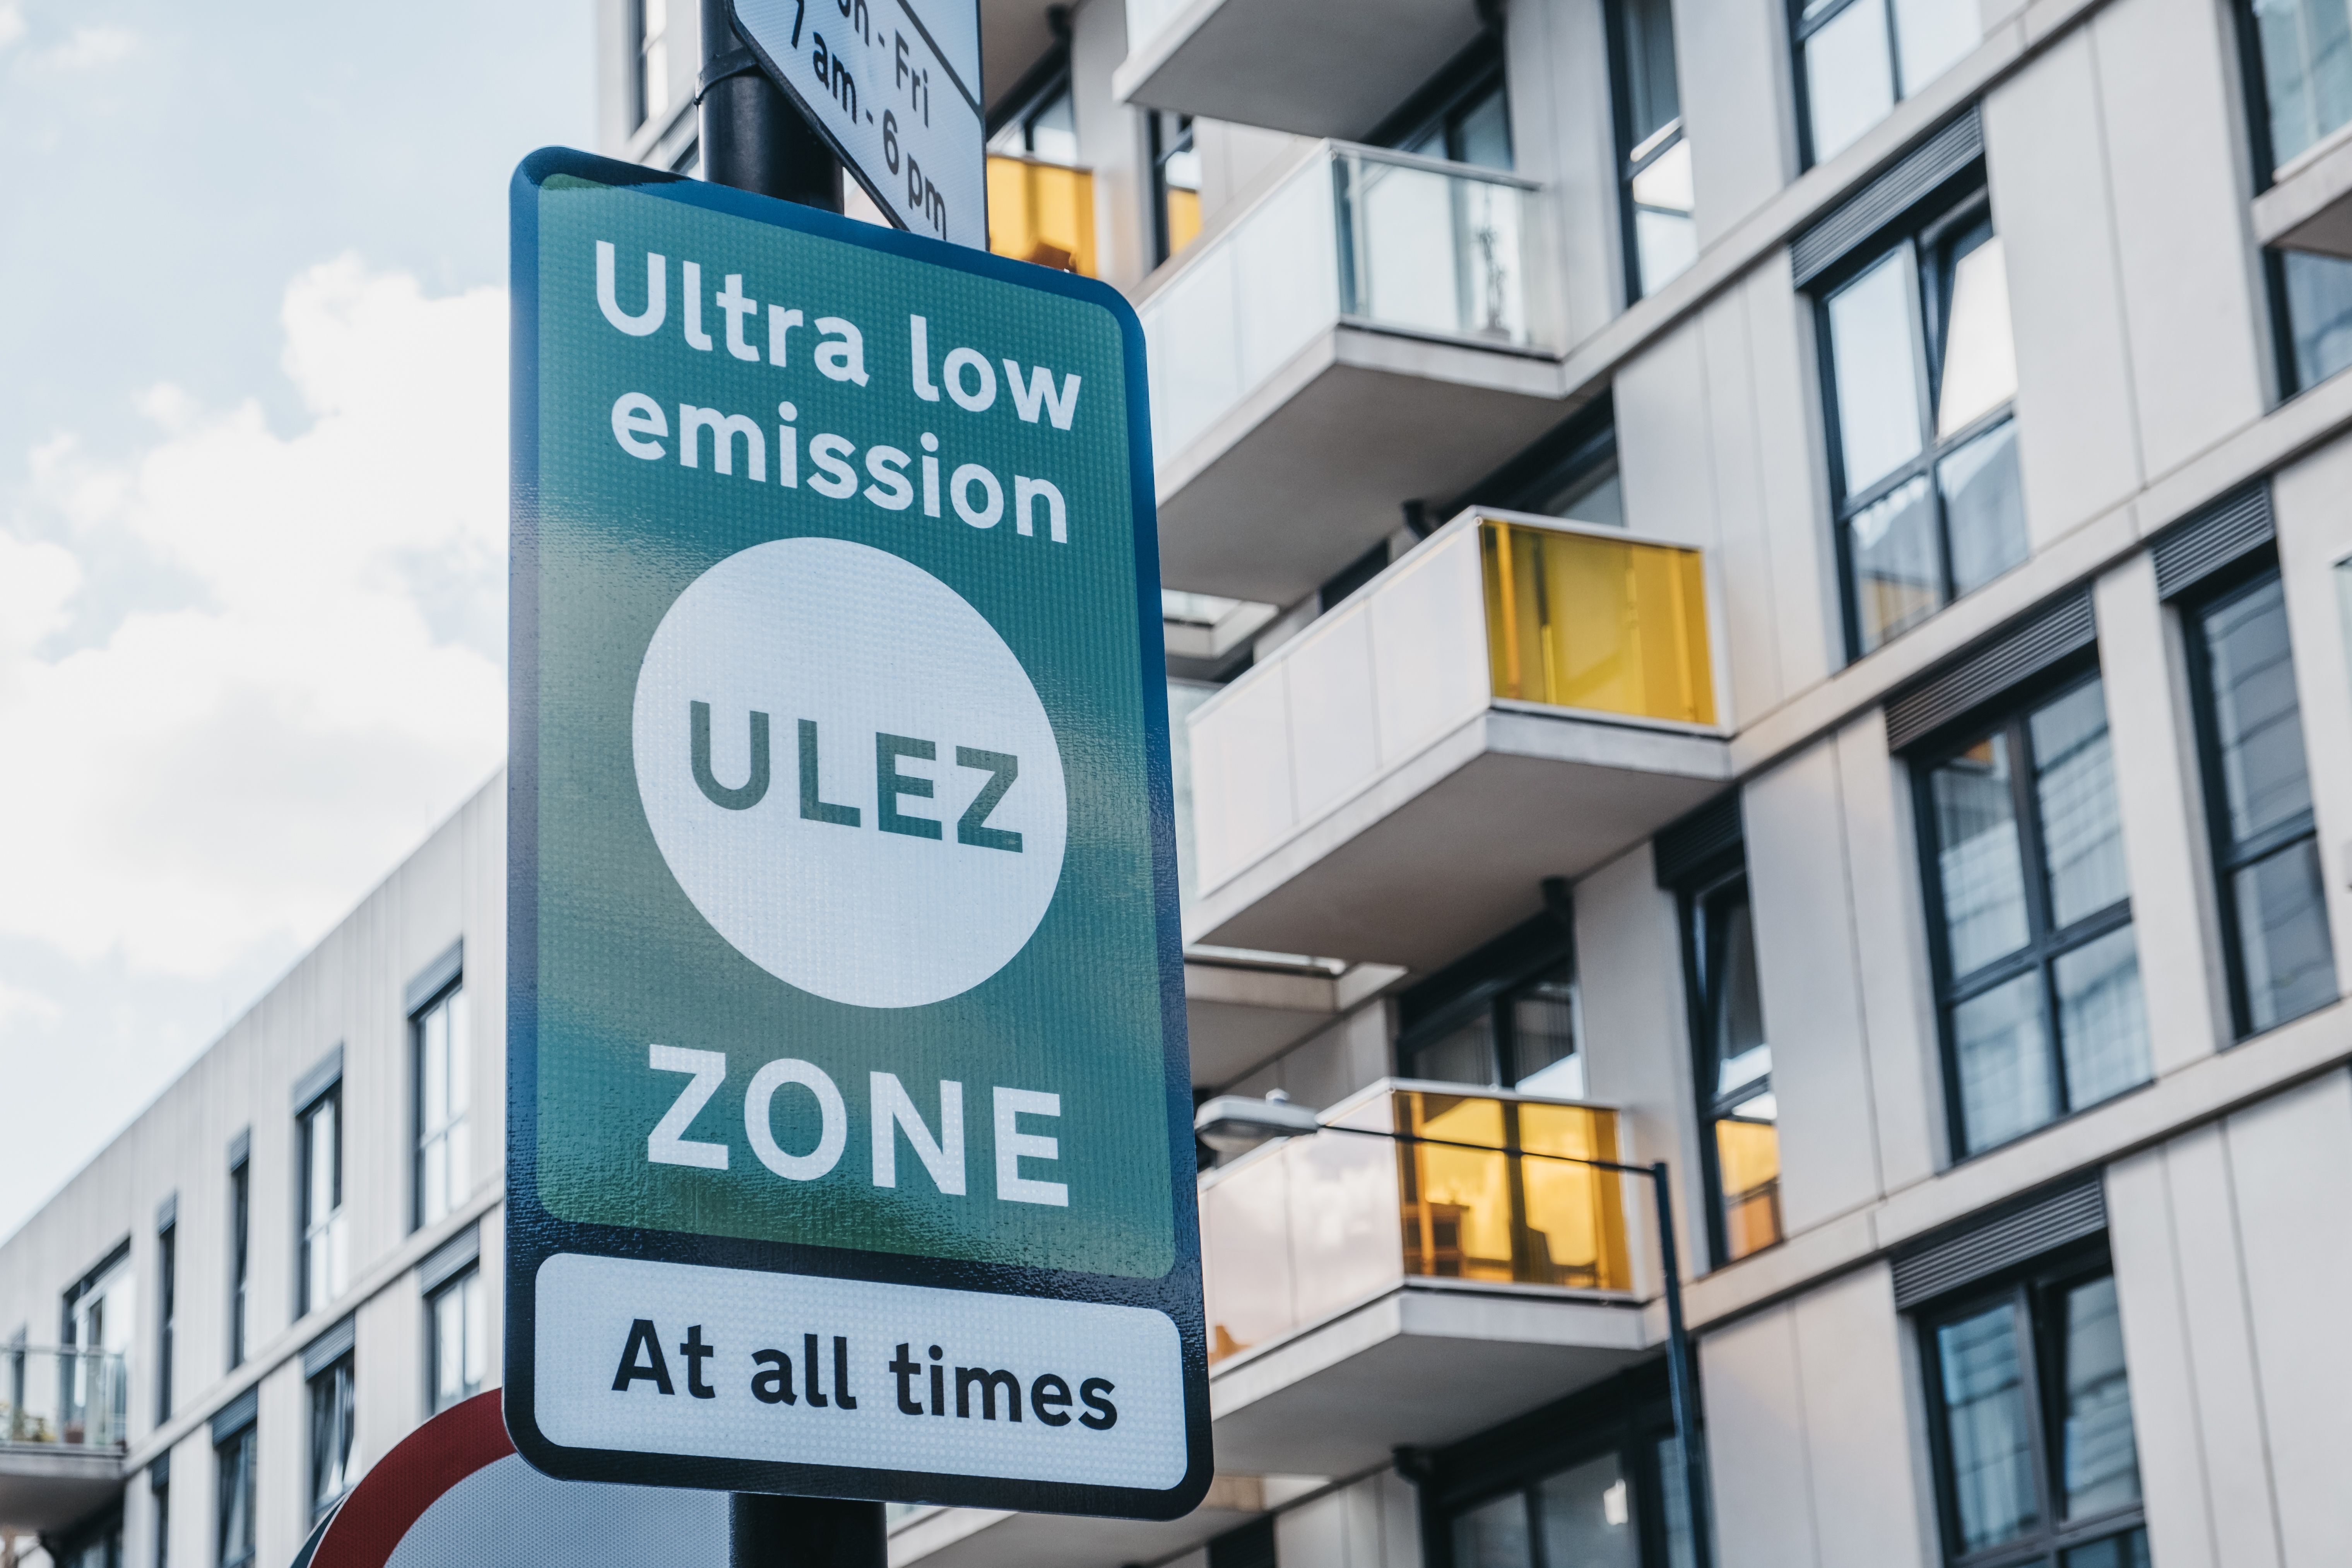 Photograph of a sign that is being used to mark a ultra low emission zone.